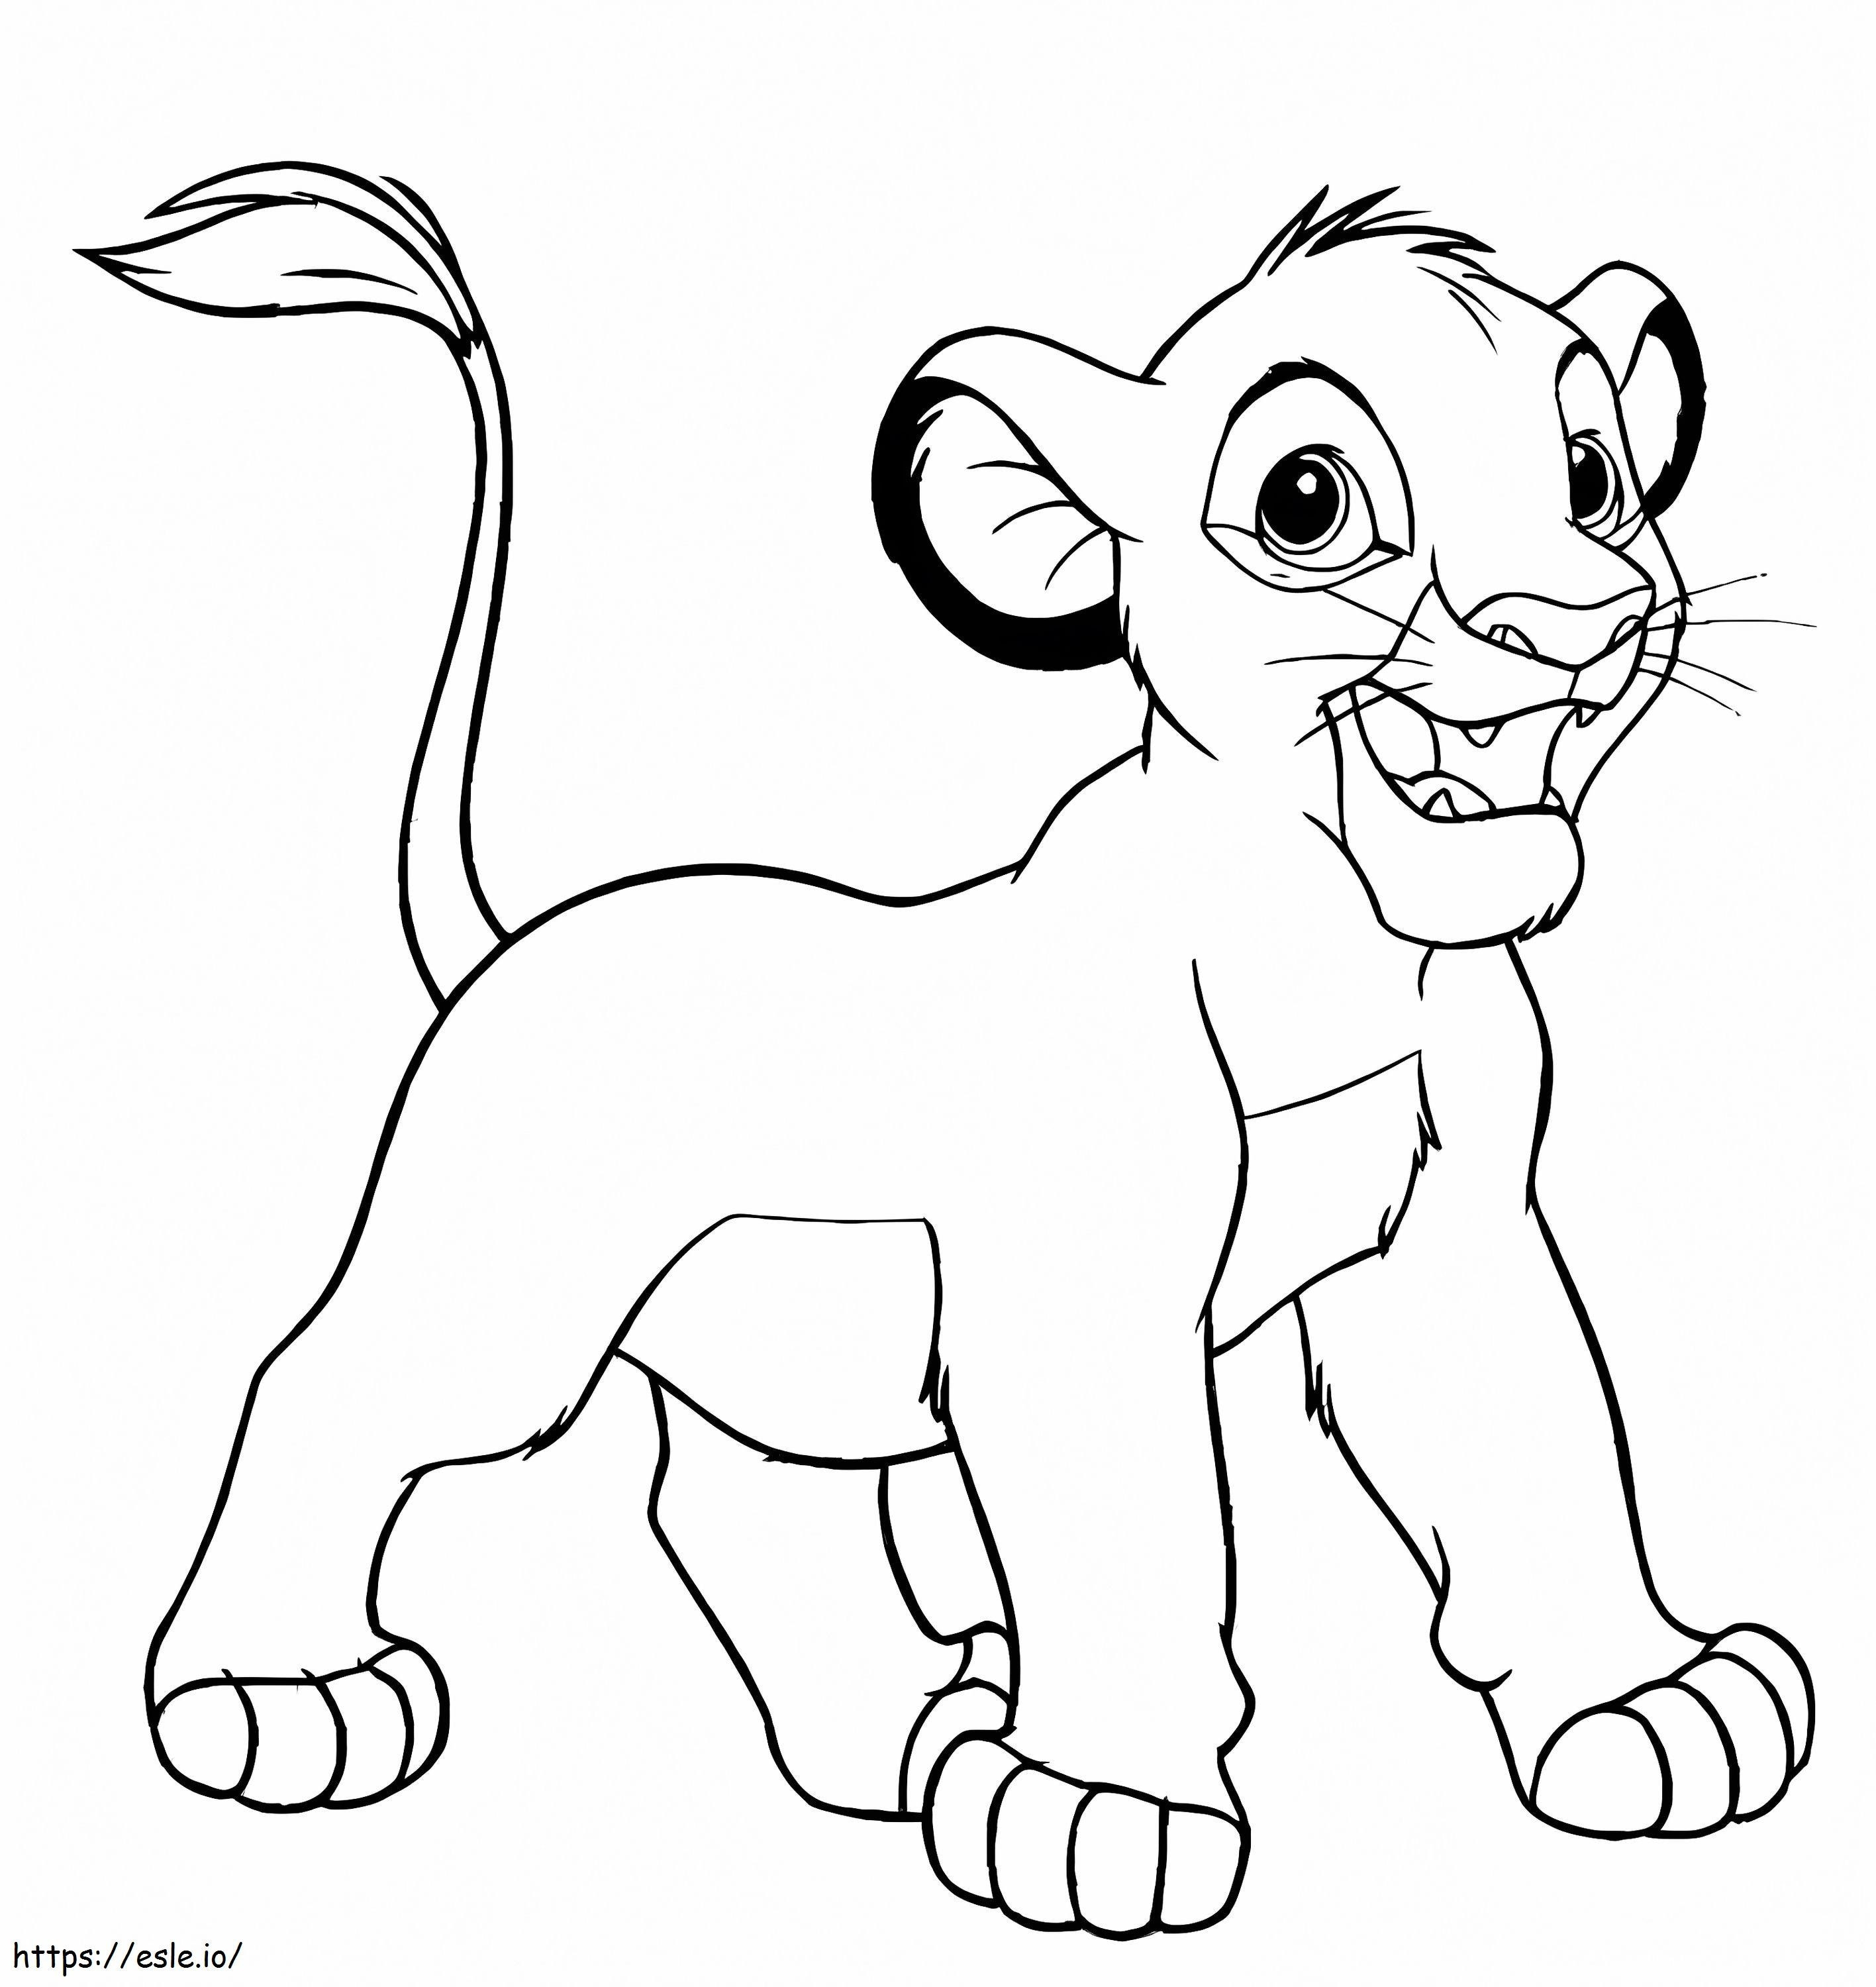 Happy Simba coloring page